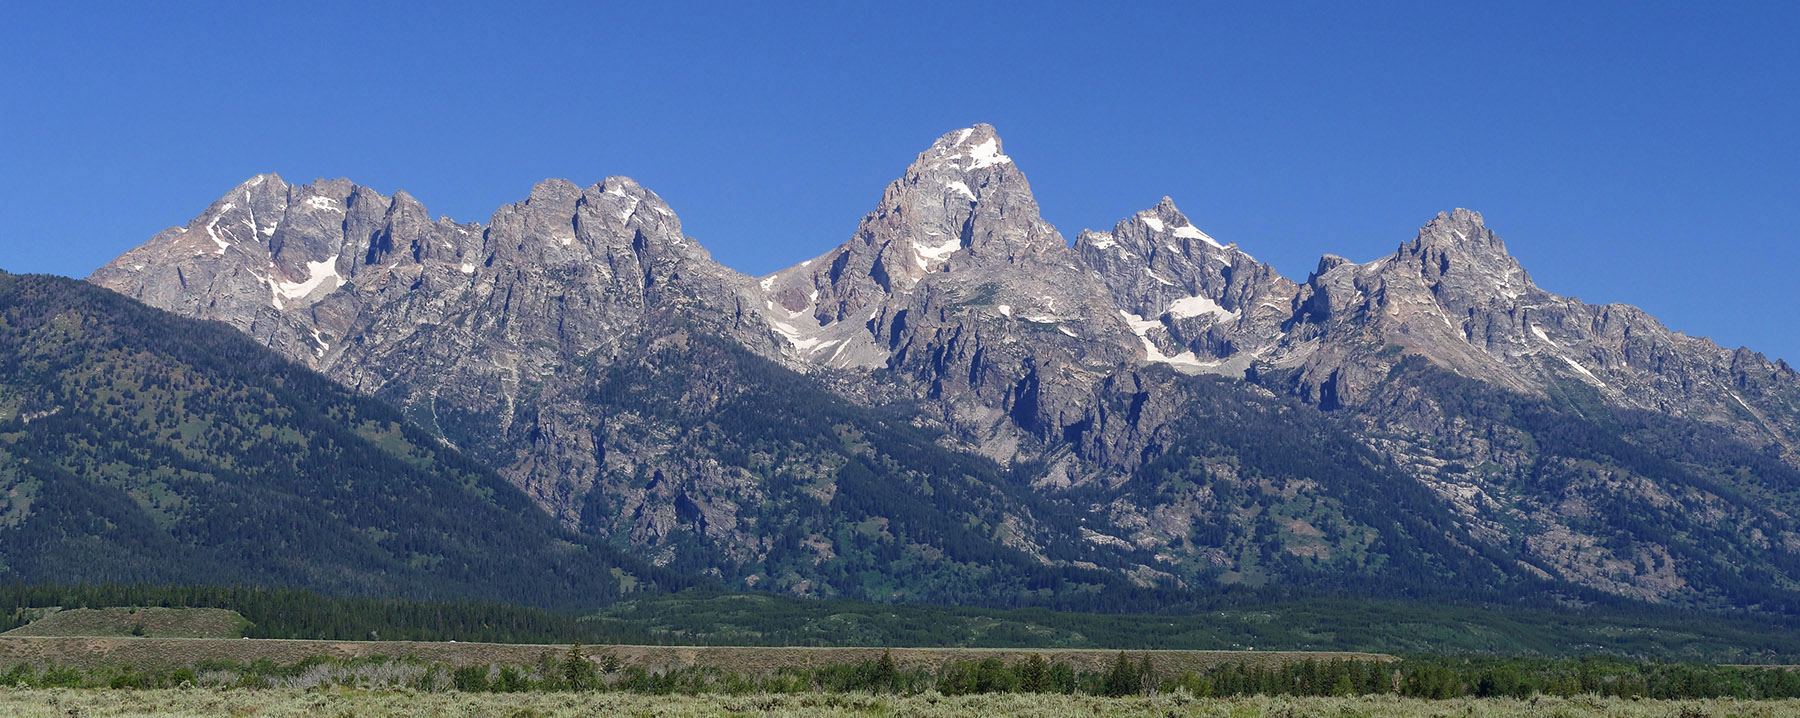 The Cathedral group of the Grand Tetons rose along a normal fault over the last 5 million years and were sculpted to their sharp angular form by glaciers over the last 2 million years with the last major glaciers receding 15,000 years ago.  They are composed largely of quartz monzonite (a type of granite) which was the core of a previous mountain range that was raised by tectonic compressive forces 55 million years ago and then eroded.  This metamorphic core of the mountains arose originally from volcanic and sedimentary rocks 2-3 billion years ago.